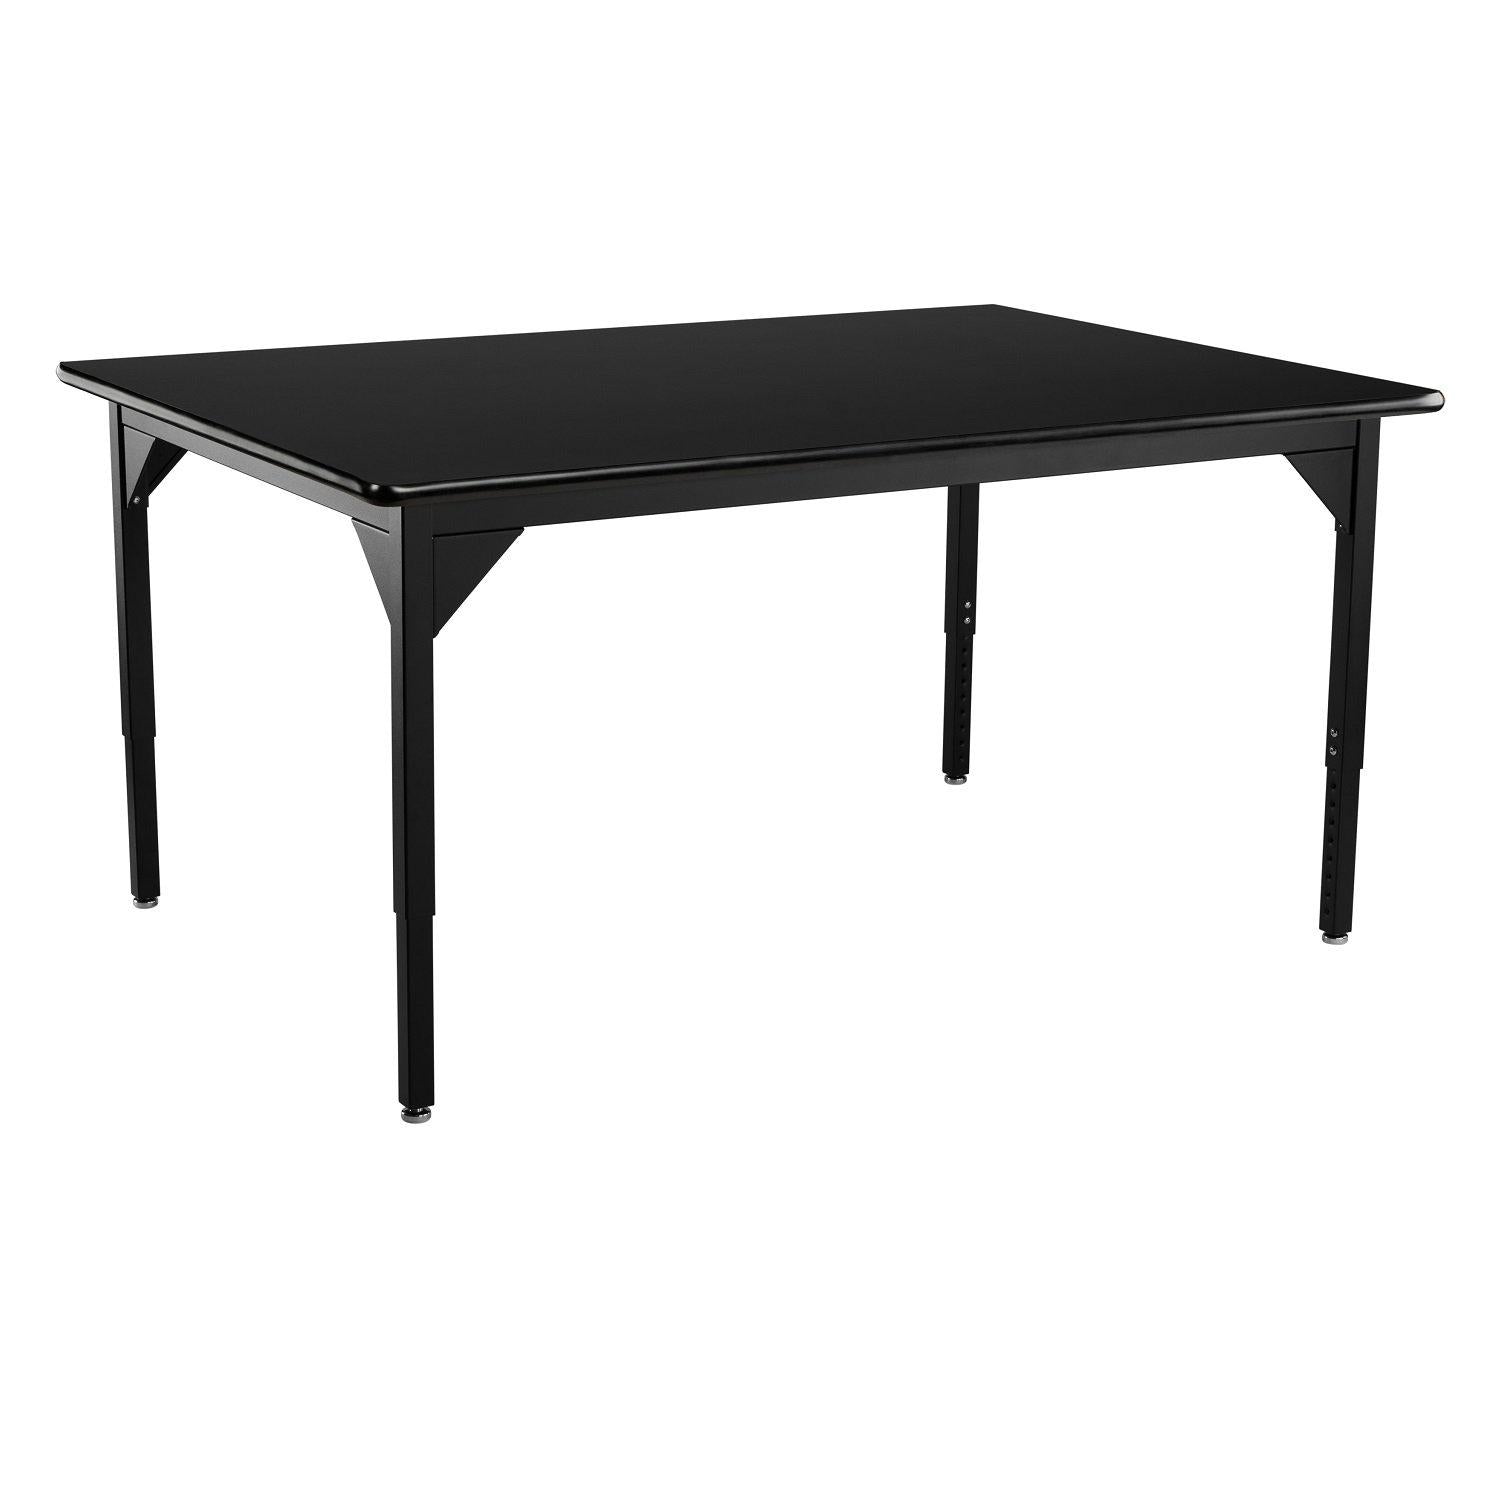 Heavy-Duty Height-Adjustable Utility Table, Black Frame, 48" x 48", High-Pressure Laminate Top with T-Mold Edge